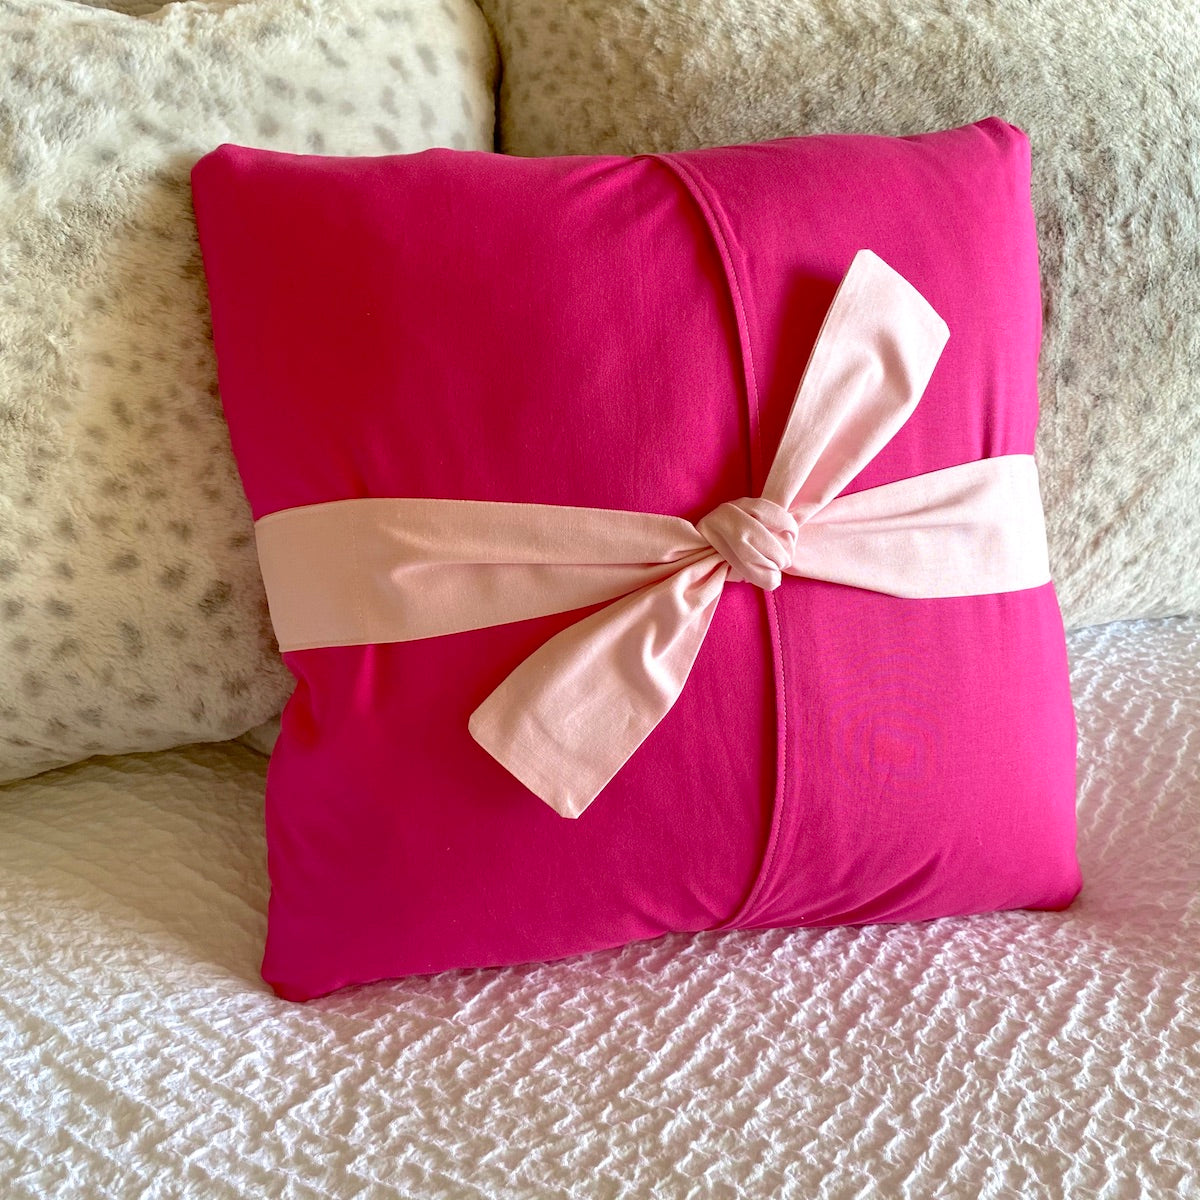 SewPINK Breast Cancer Awareness Ribbon Pillow by Sewfinity